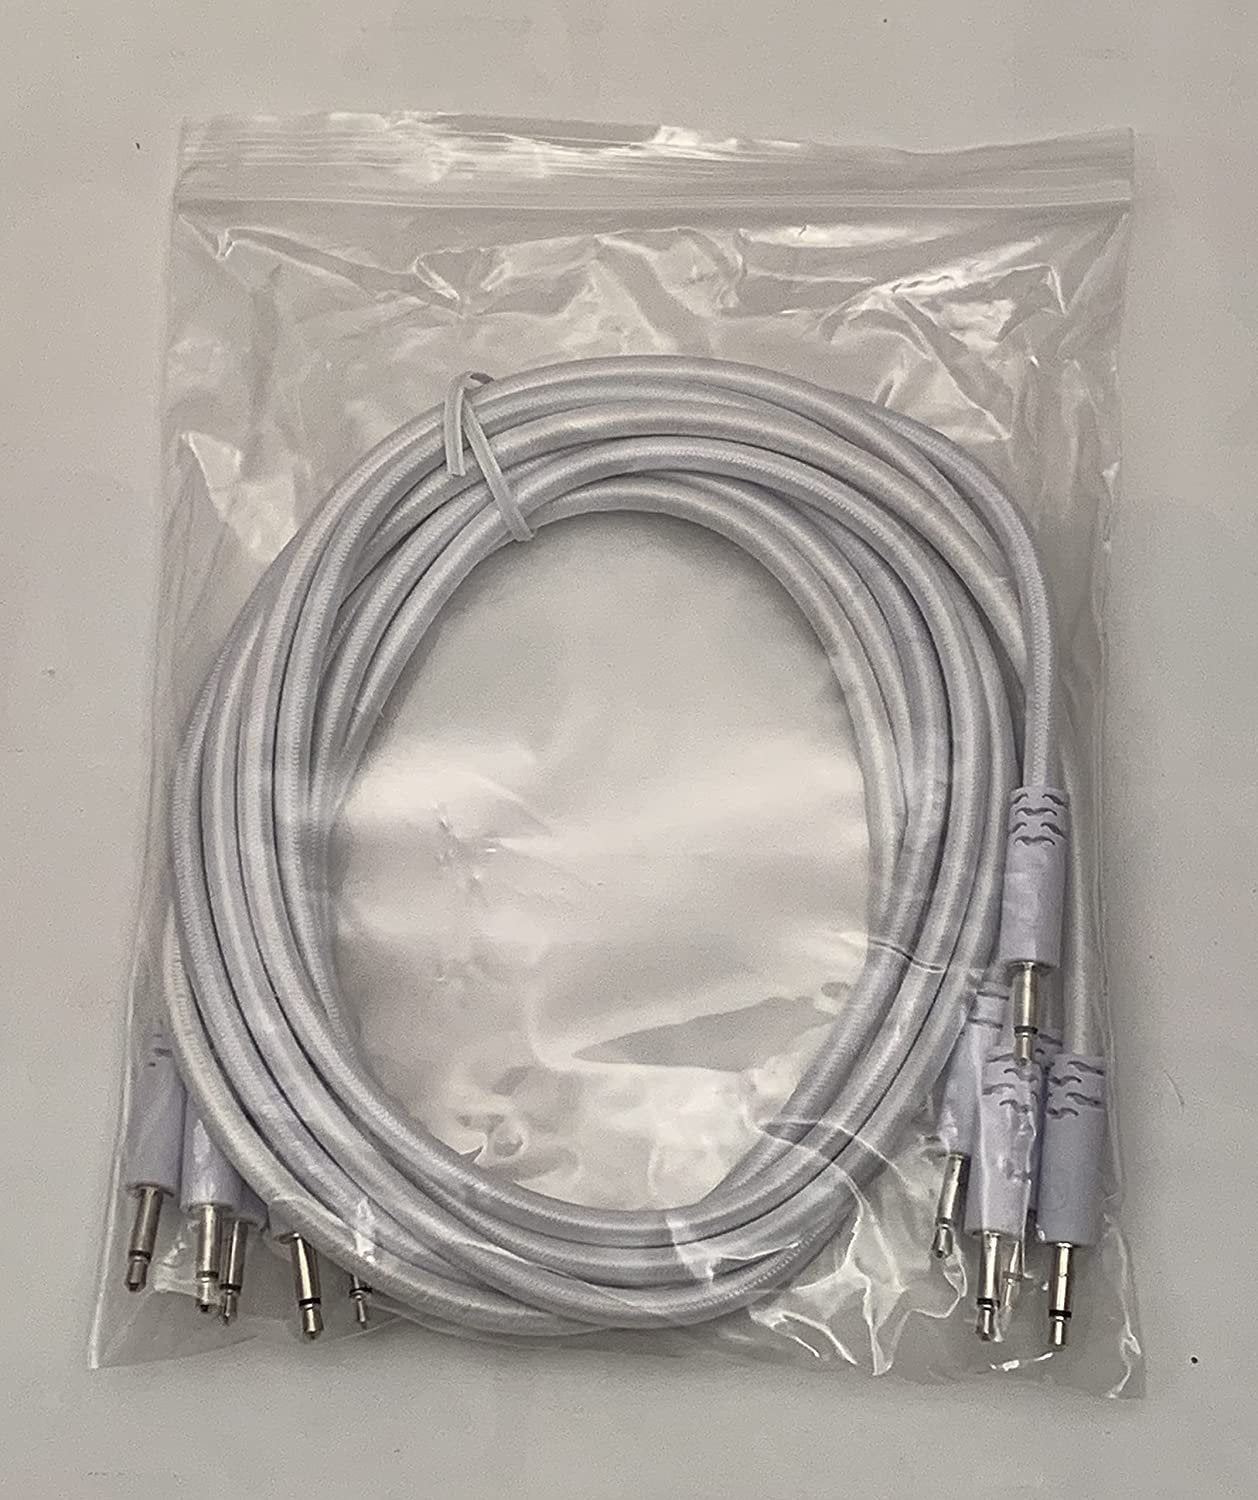 Luigis Modular Bucatini Braided Eurorack Patch Cables - Package of 5 White Cables, 36" (90 cm)